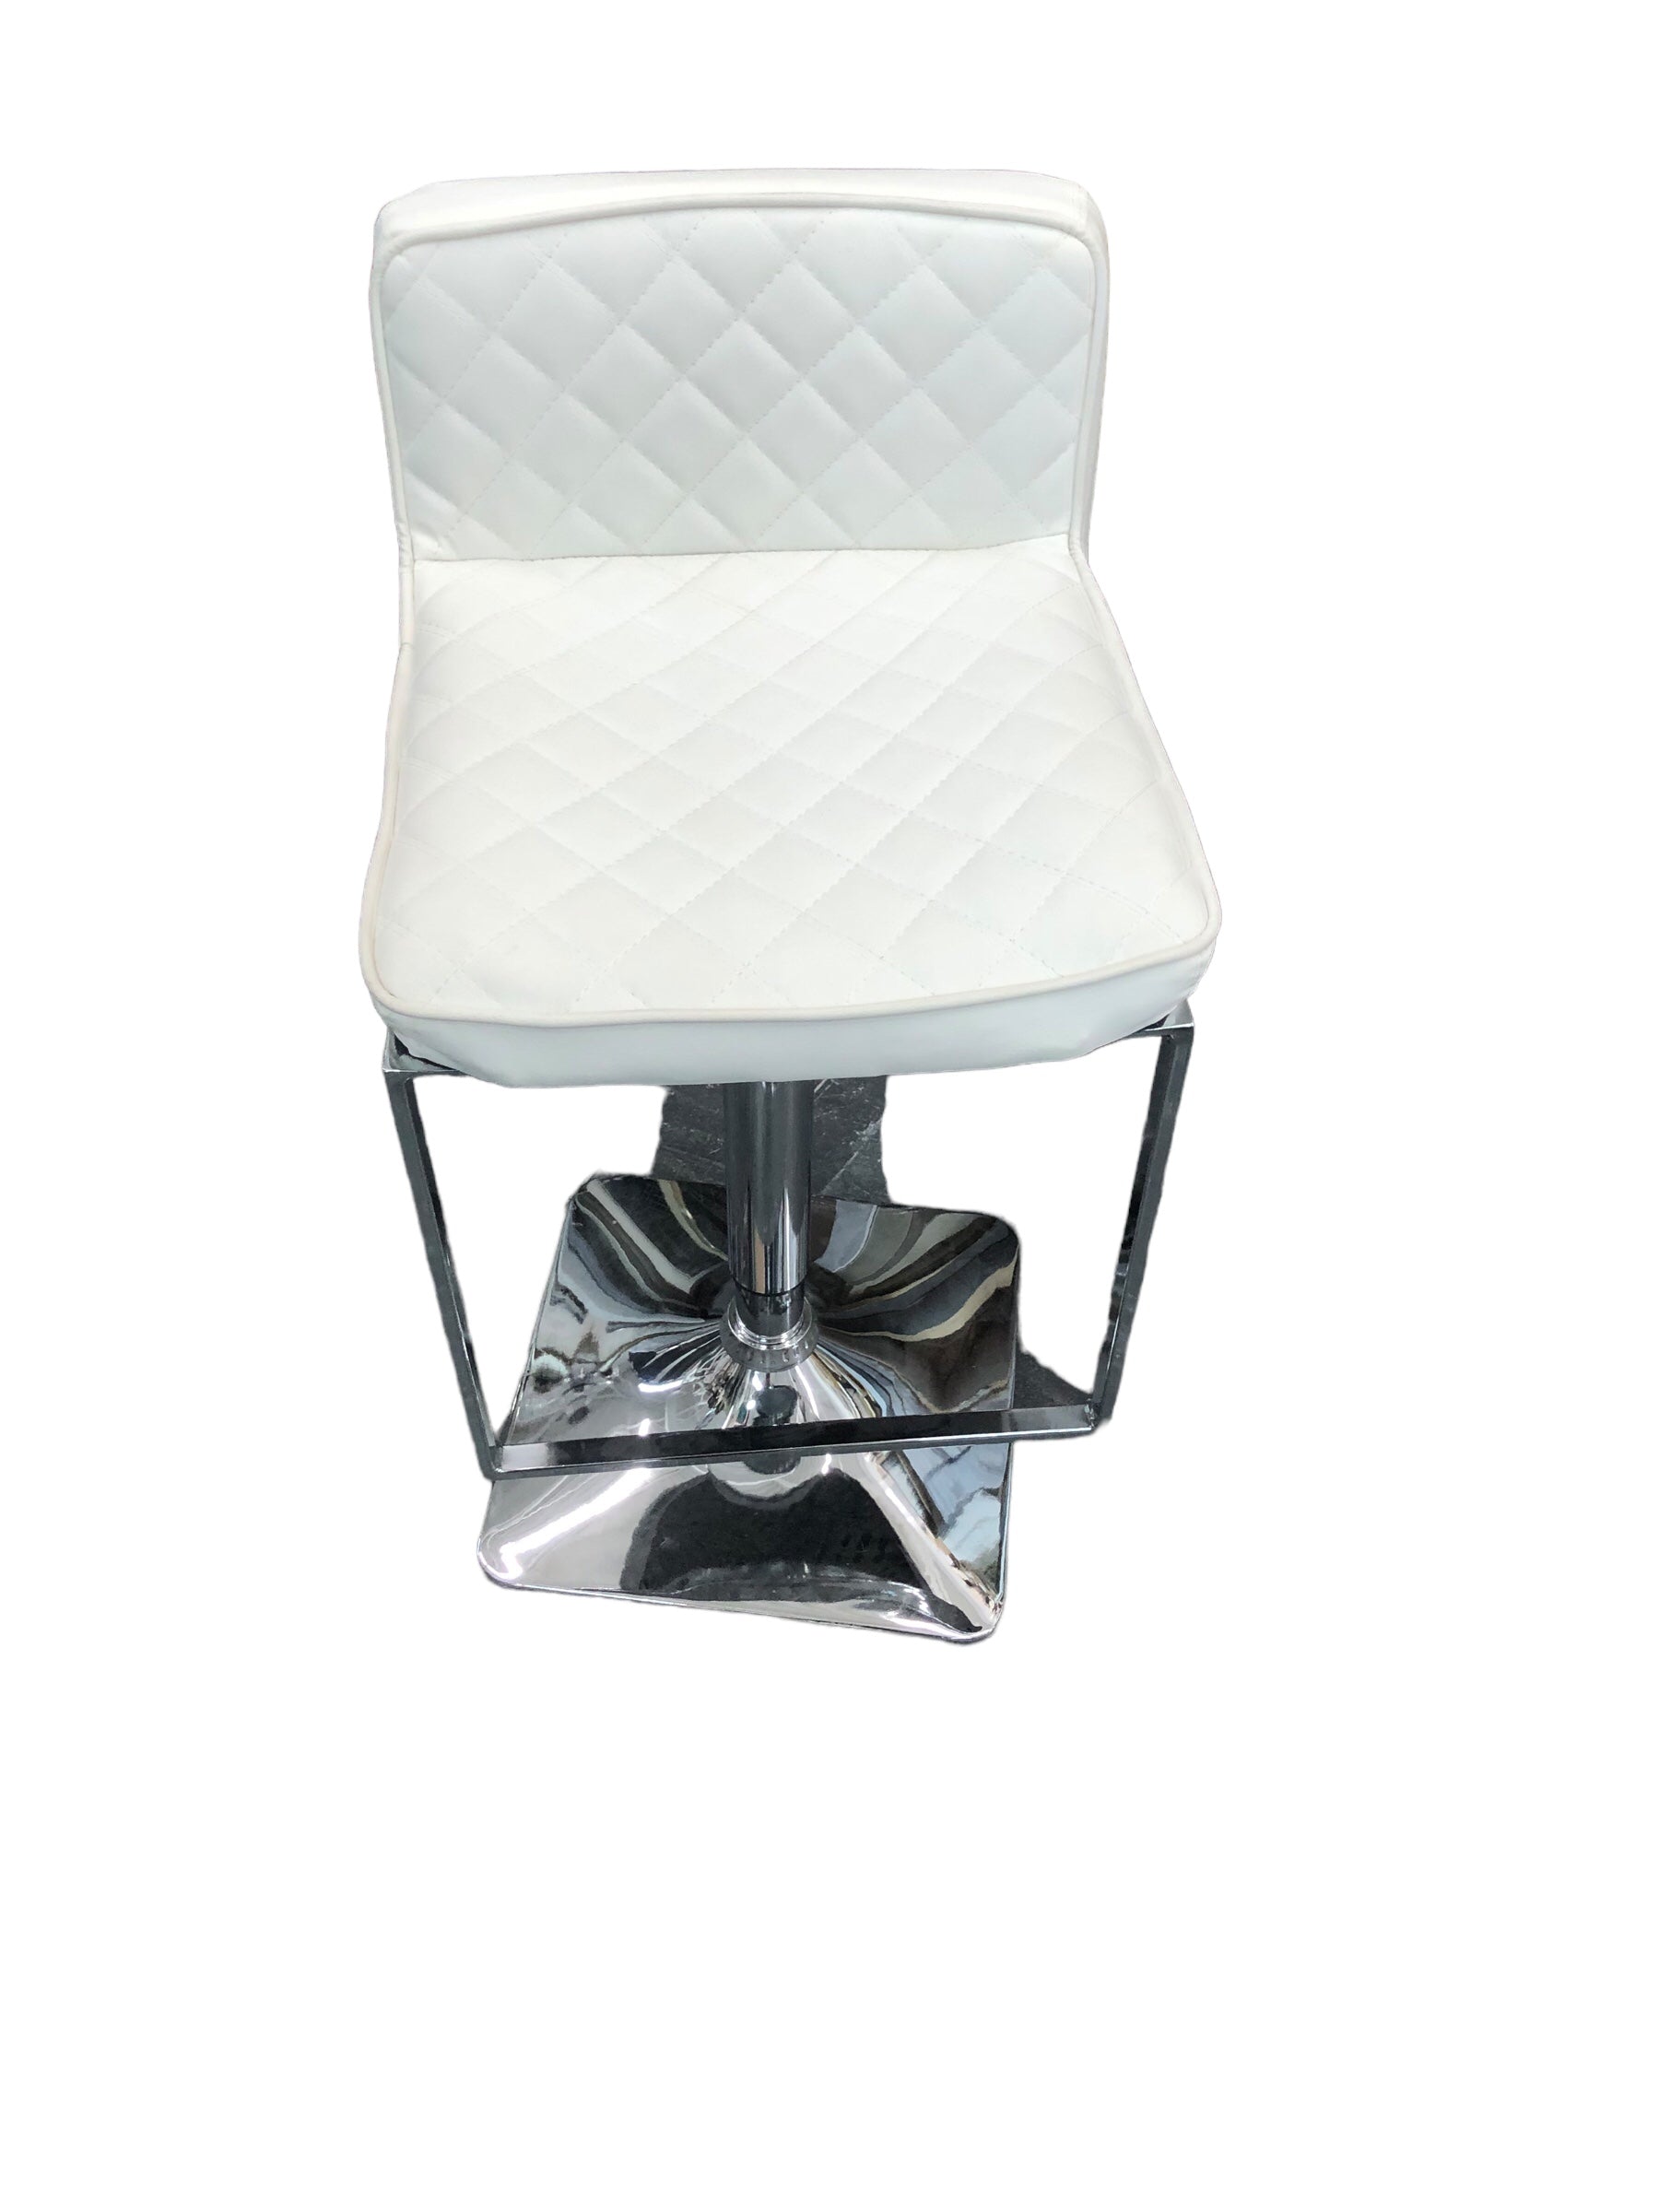 White faux leather adjustable chair